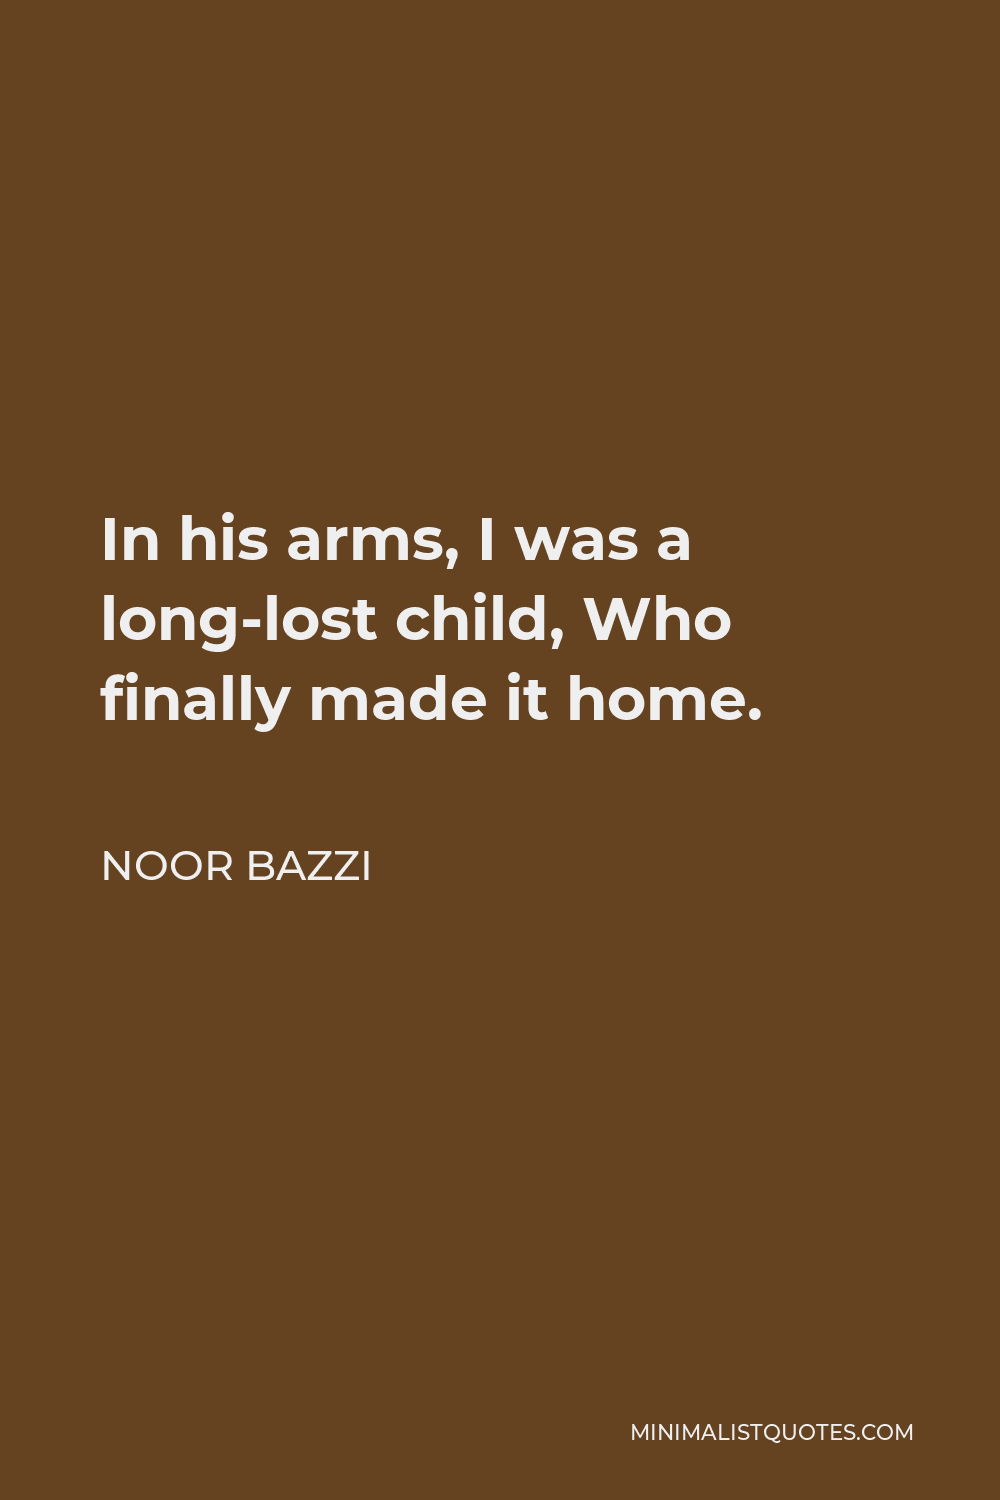 Noor Bazzi Quote - In his arms, I was a long-lost child, Who finally made it home.